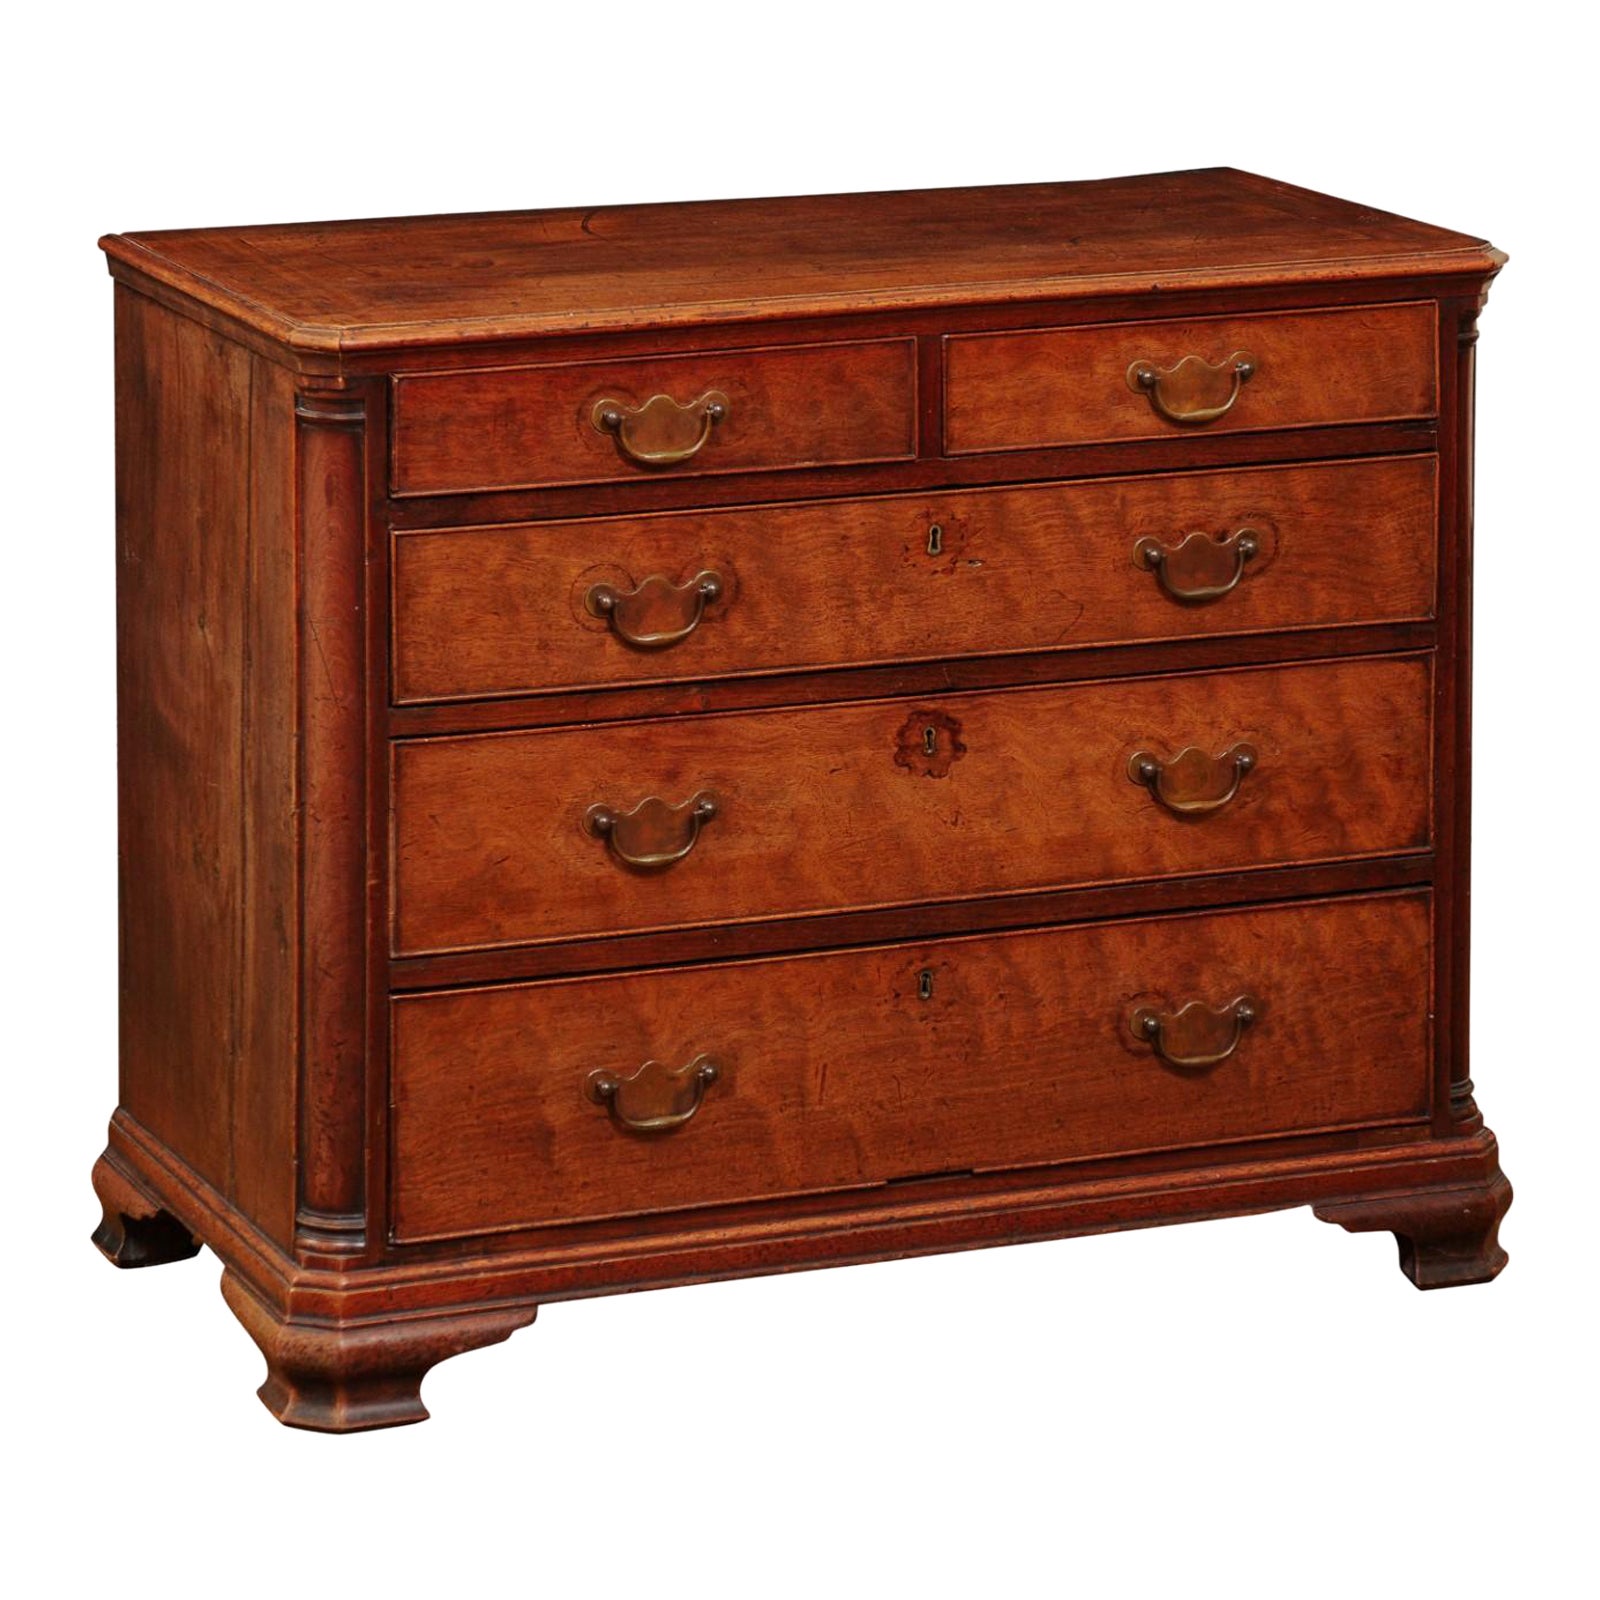 Early 19th C. English Mahogany Chest with Rounded Columnar Corners & 5 Drawers For Sale